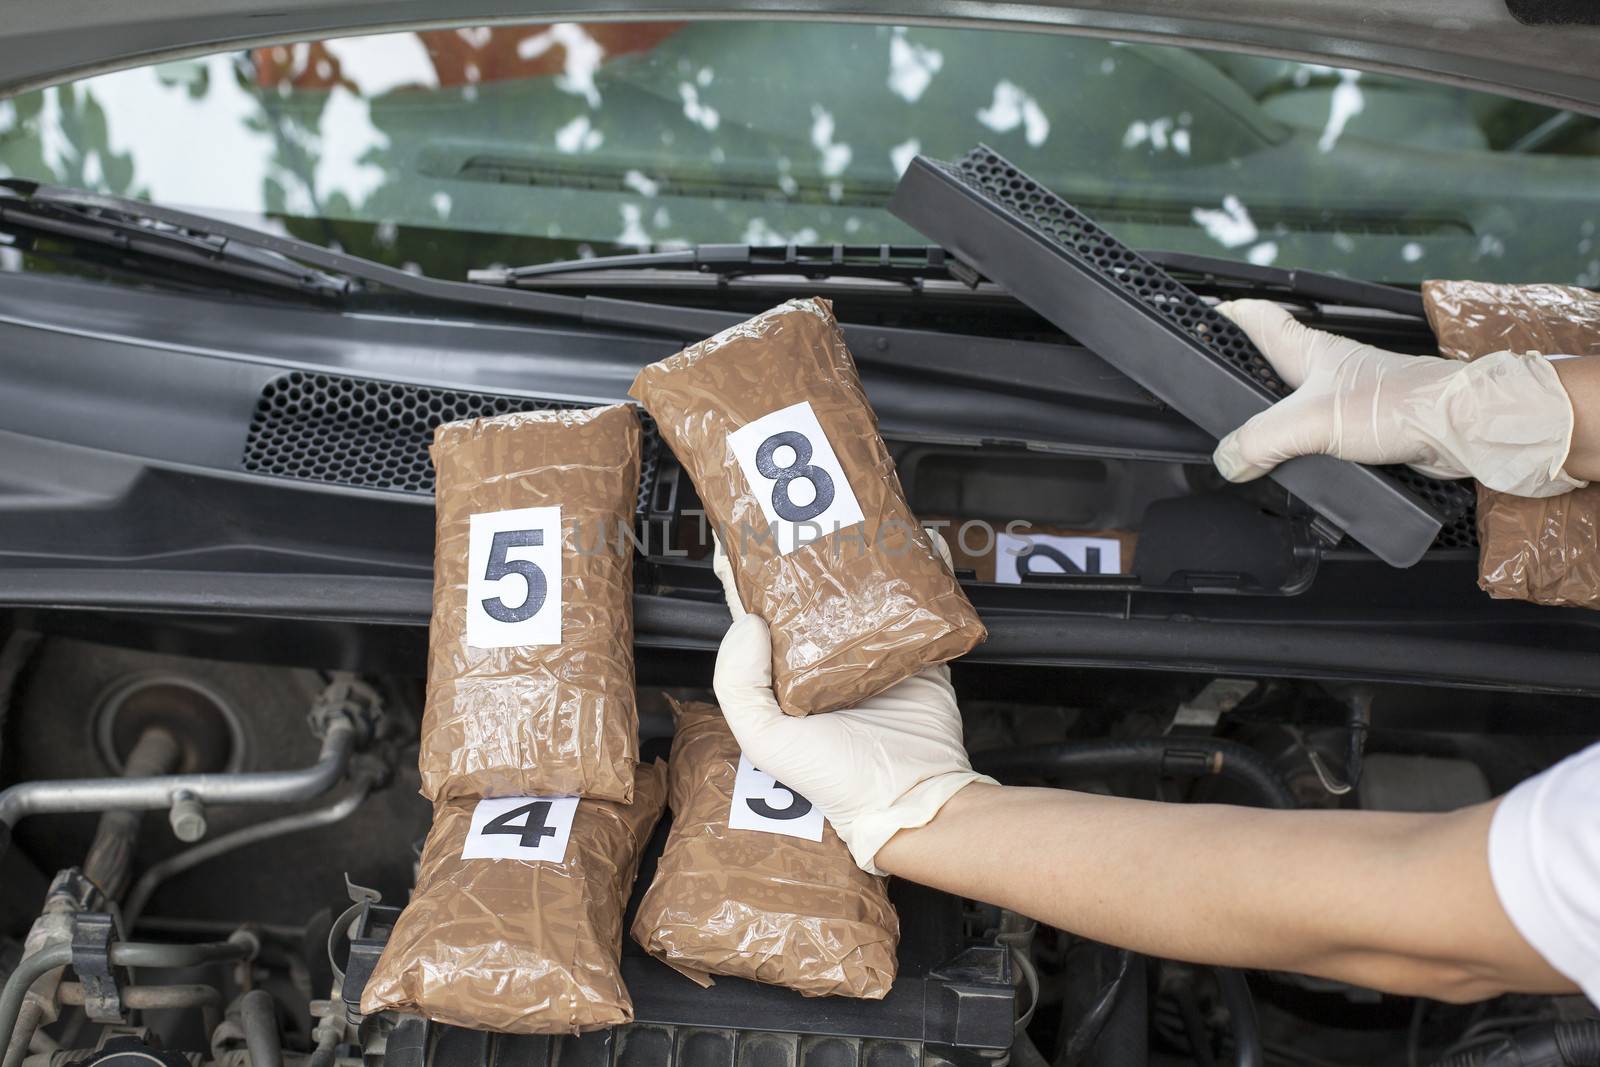 Hidden drugs in a vehicle compartment